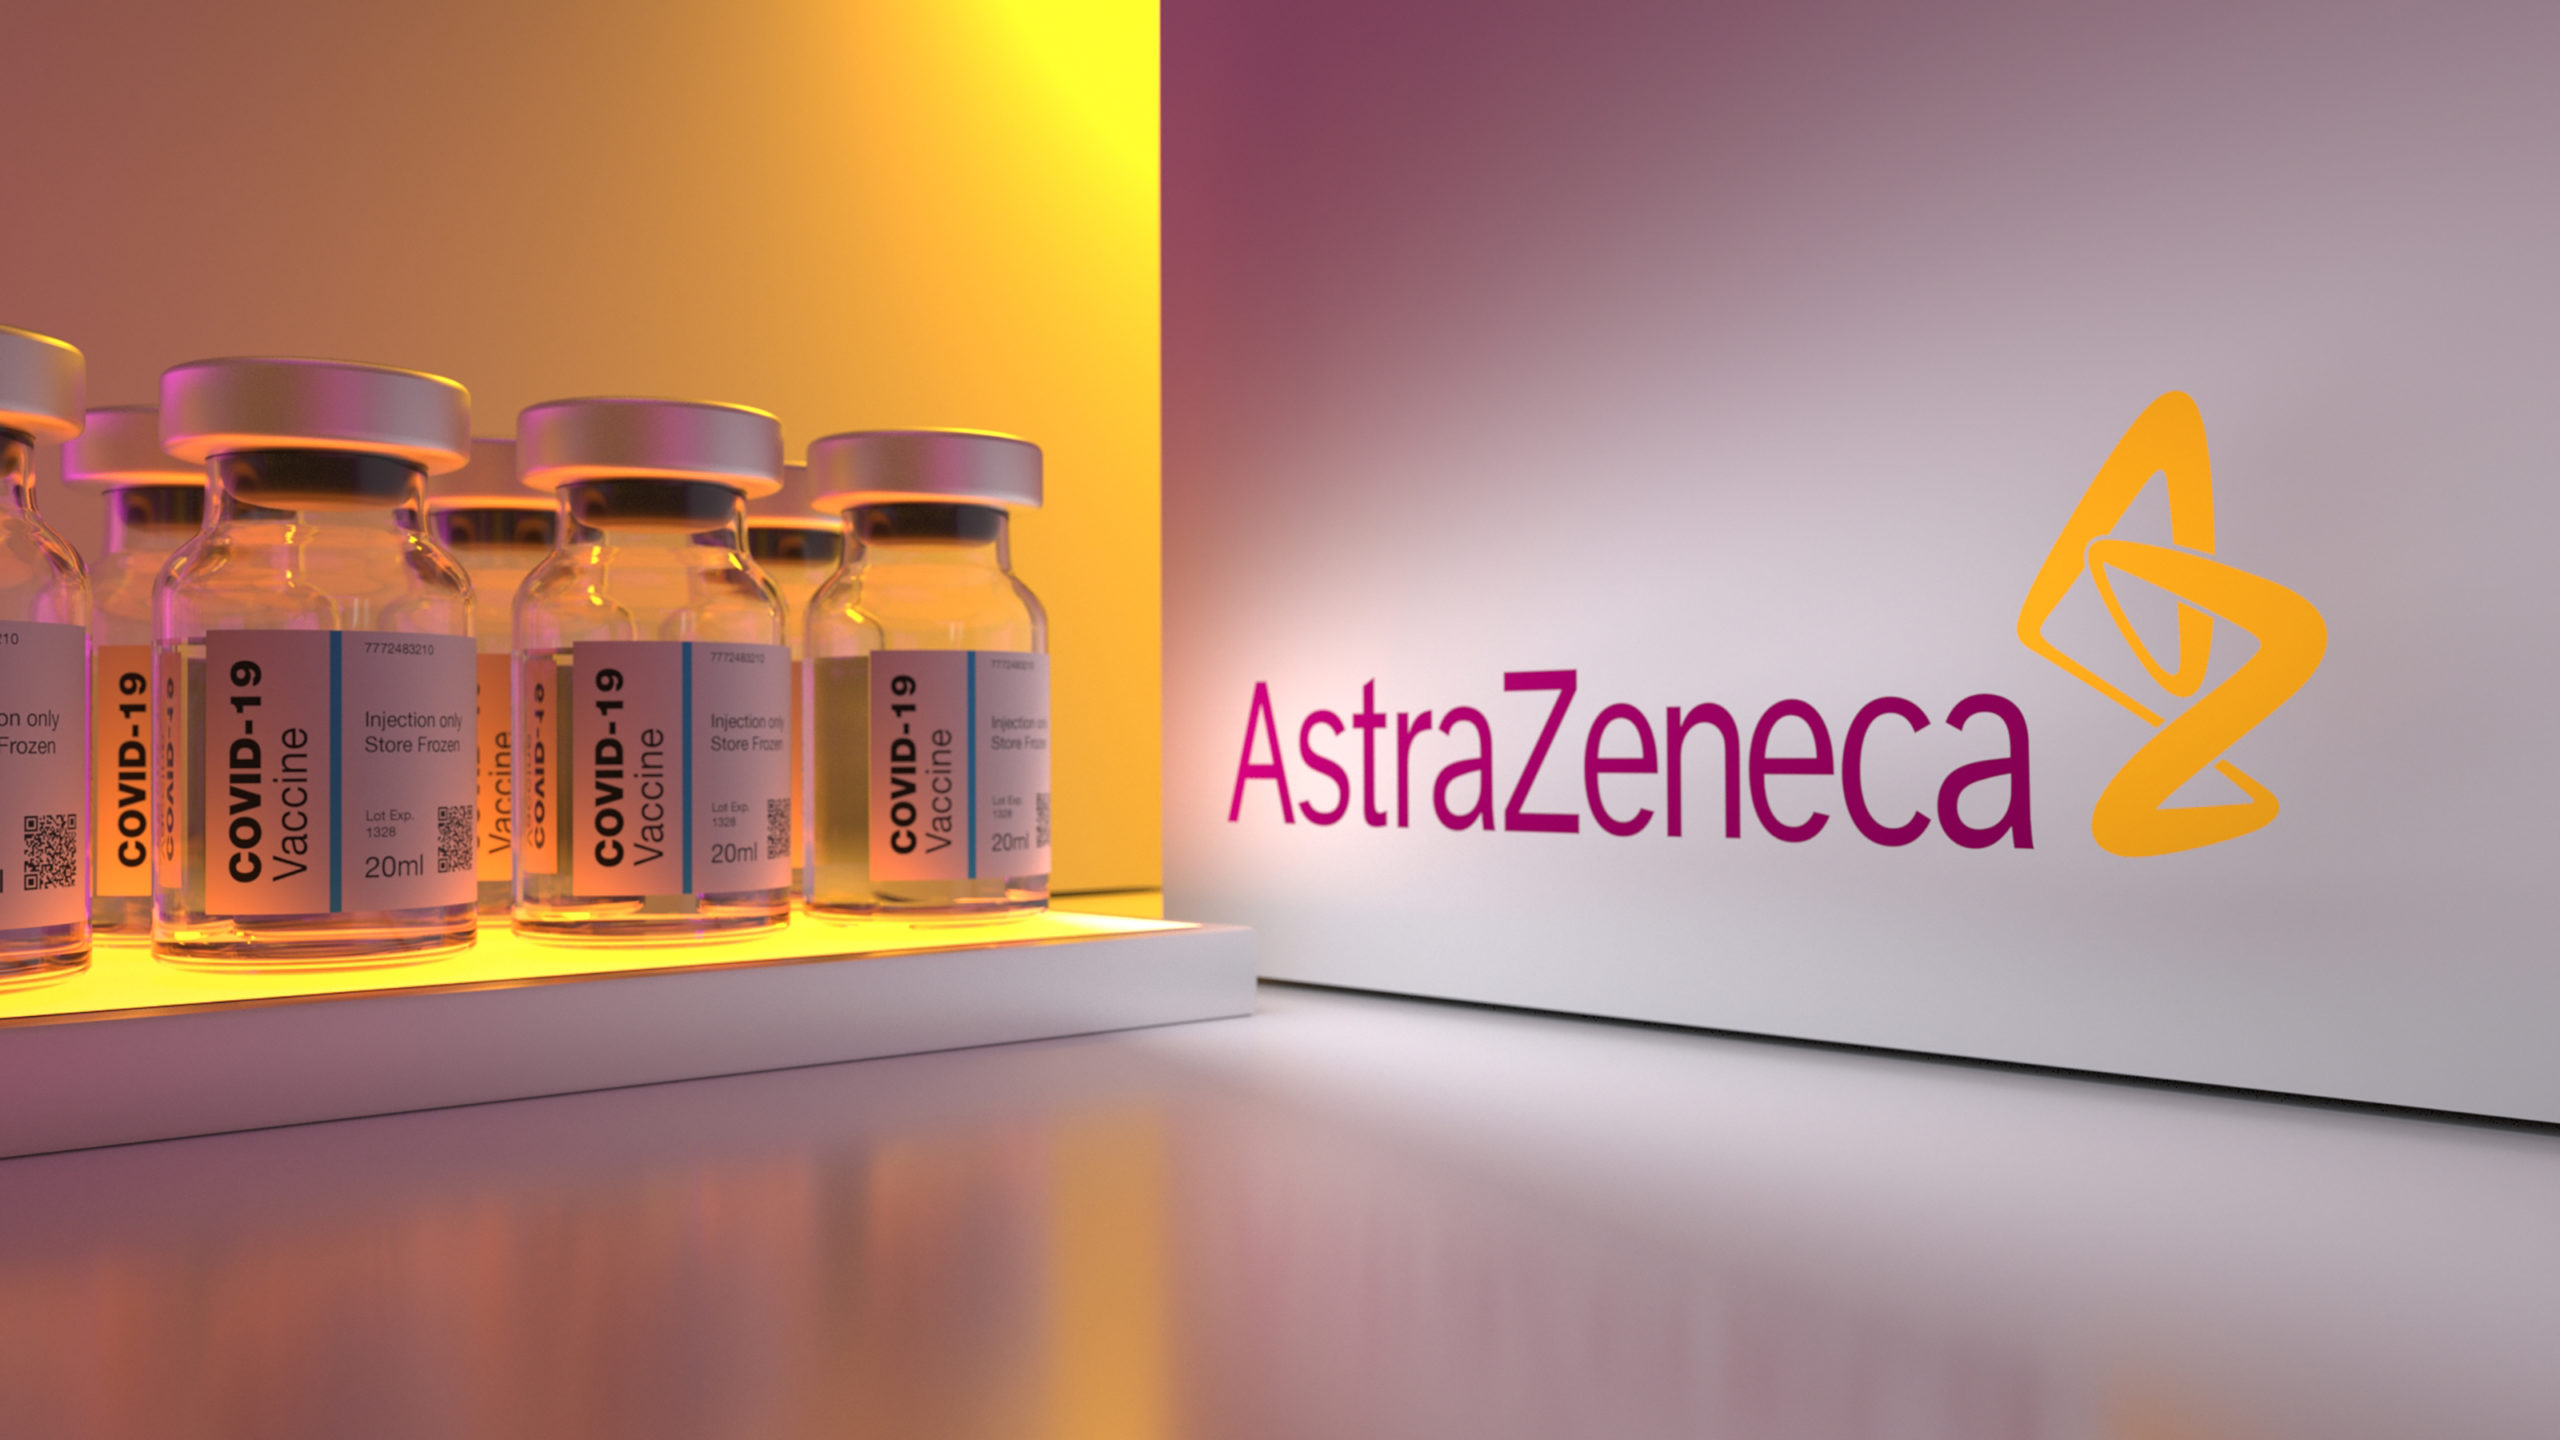 After court ruling, AstraZeneca and EU both claim victory